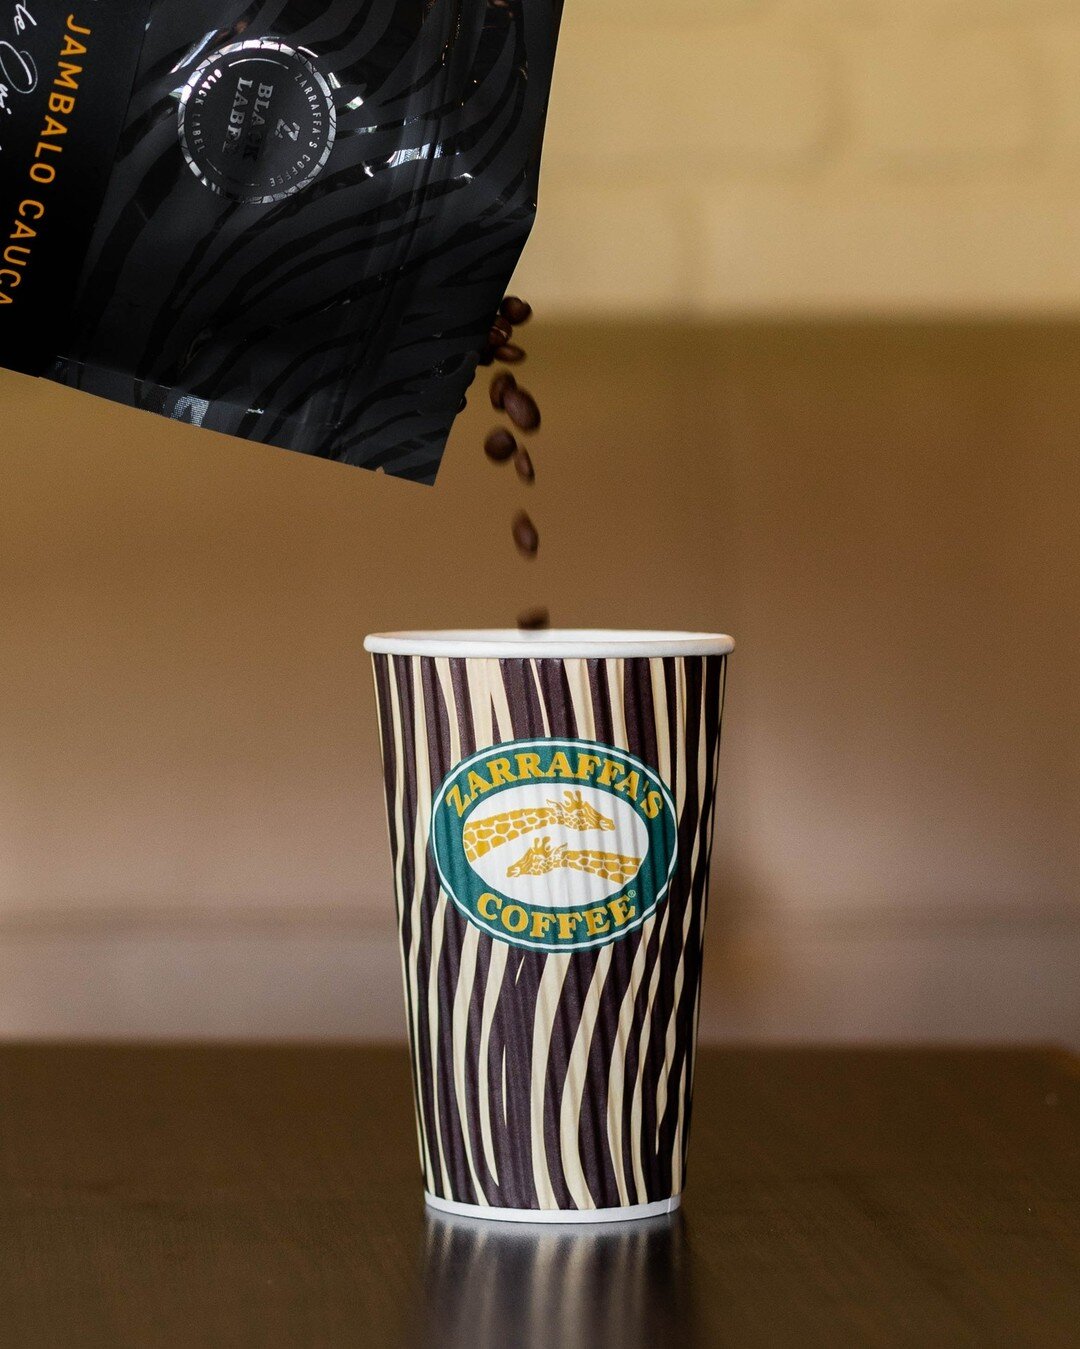 Pour one out, it's almost the weekend ☕ Take a coffee bag home with you on your next visit, and you'll never be without our luxury beans 🤎

#Zarraffas #ZarraffasCoffee #SpecialtyCoffee #CoffeeBeans